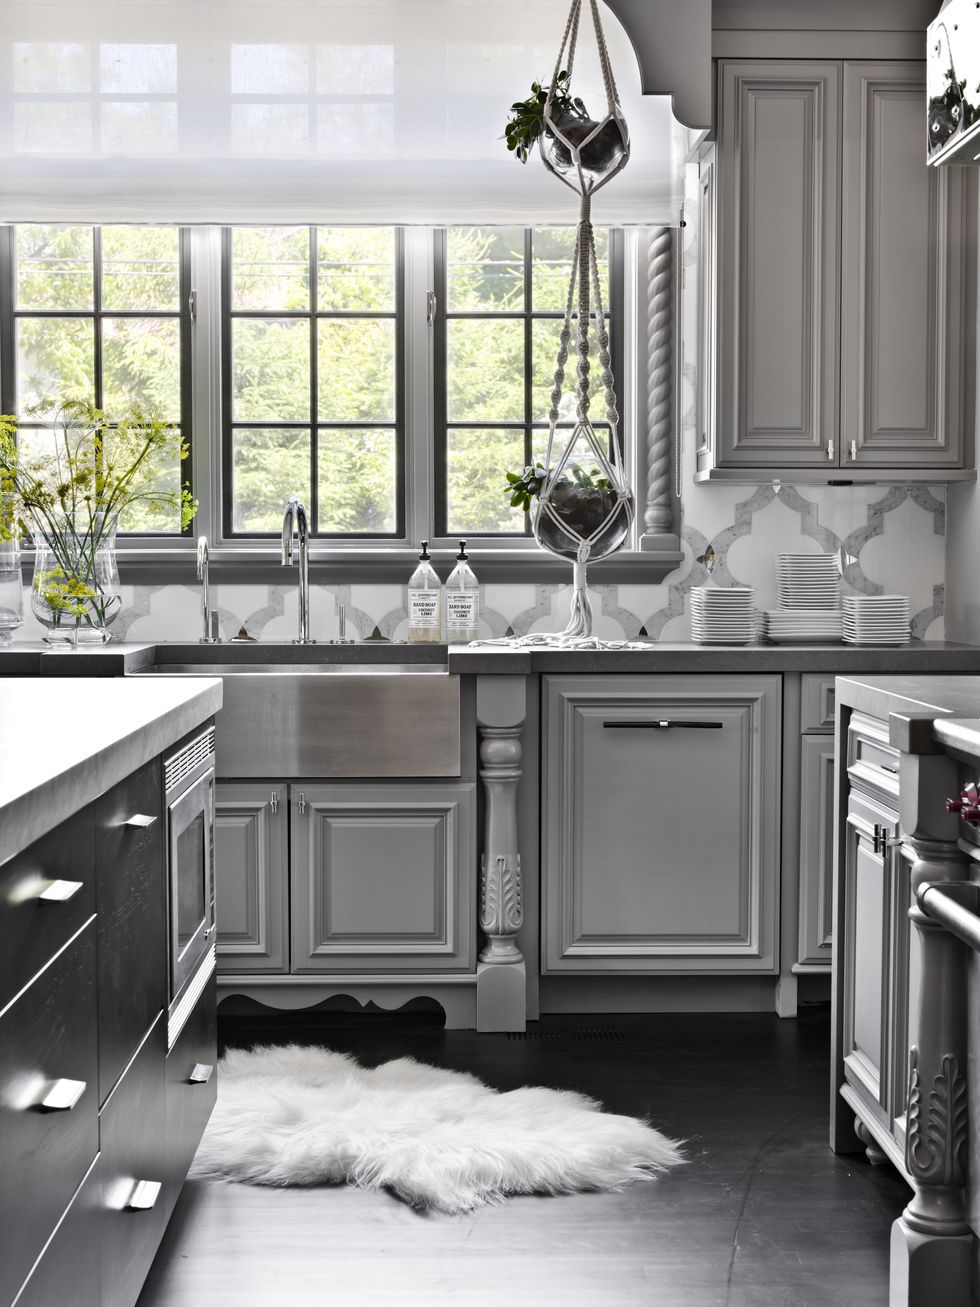 Beautify Your Kitchen With The
  Kitchen Backsplash Tile